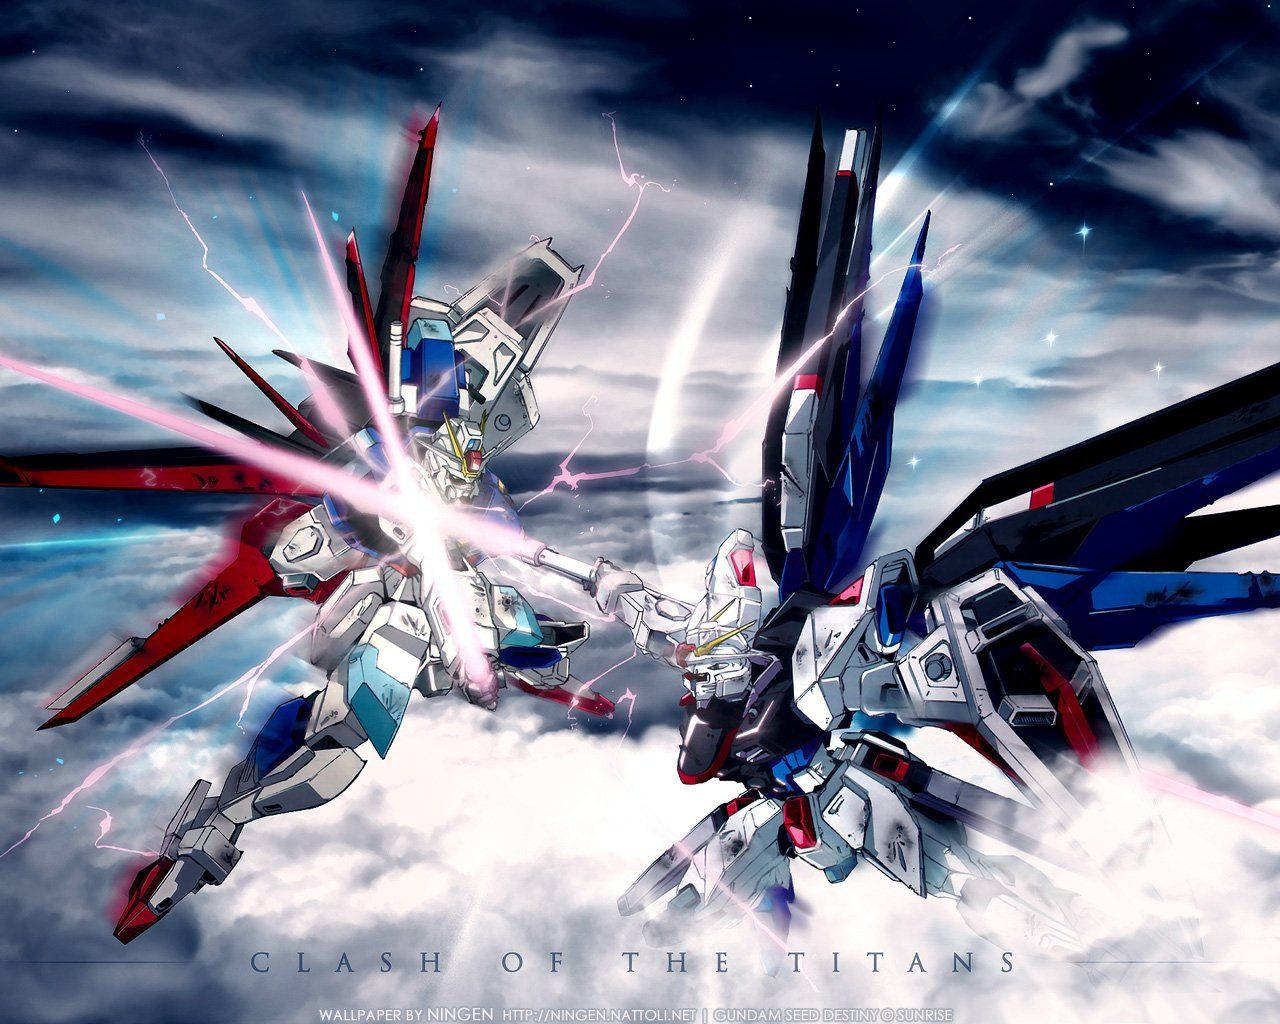 "The mighty Gundam in battle, ready to defend justice and freedom." Wallpaper